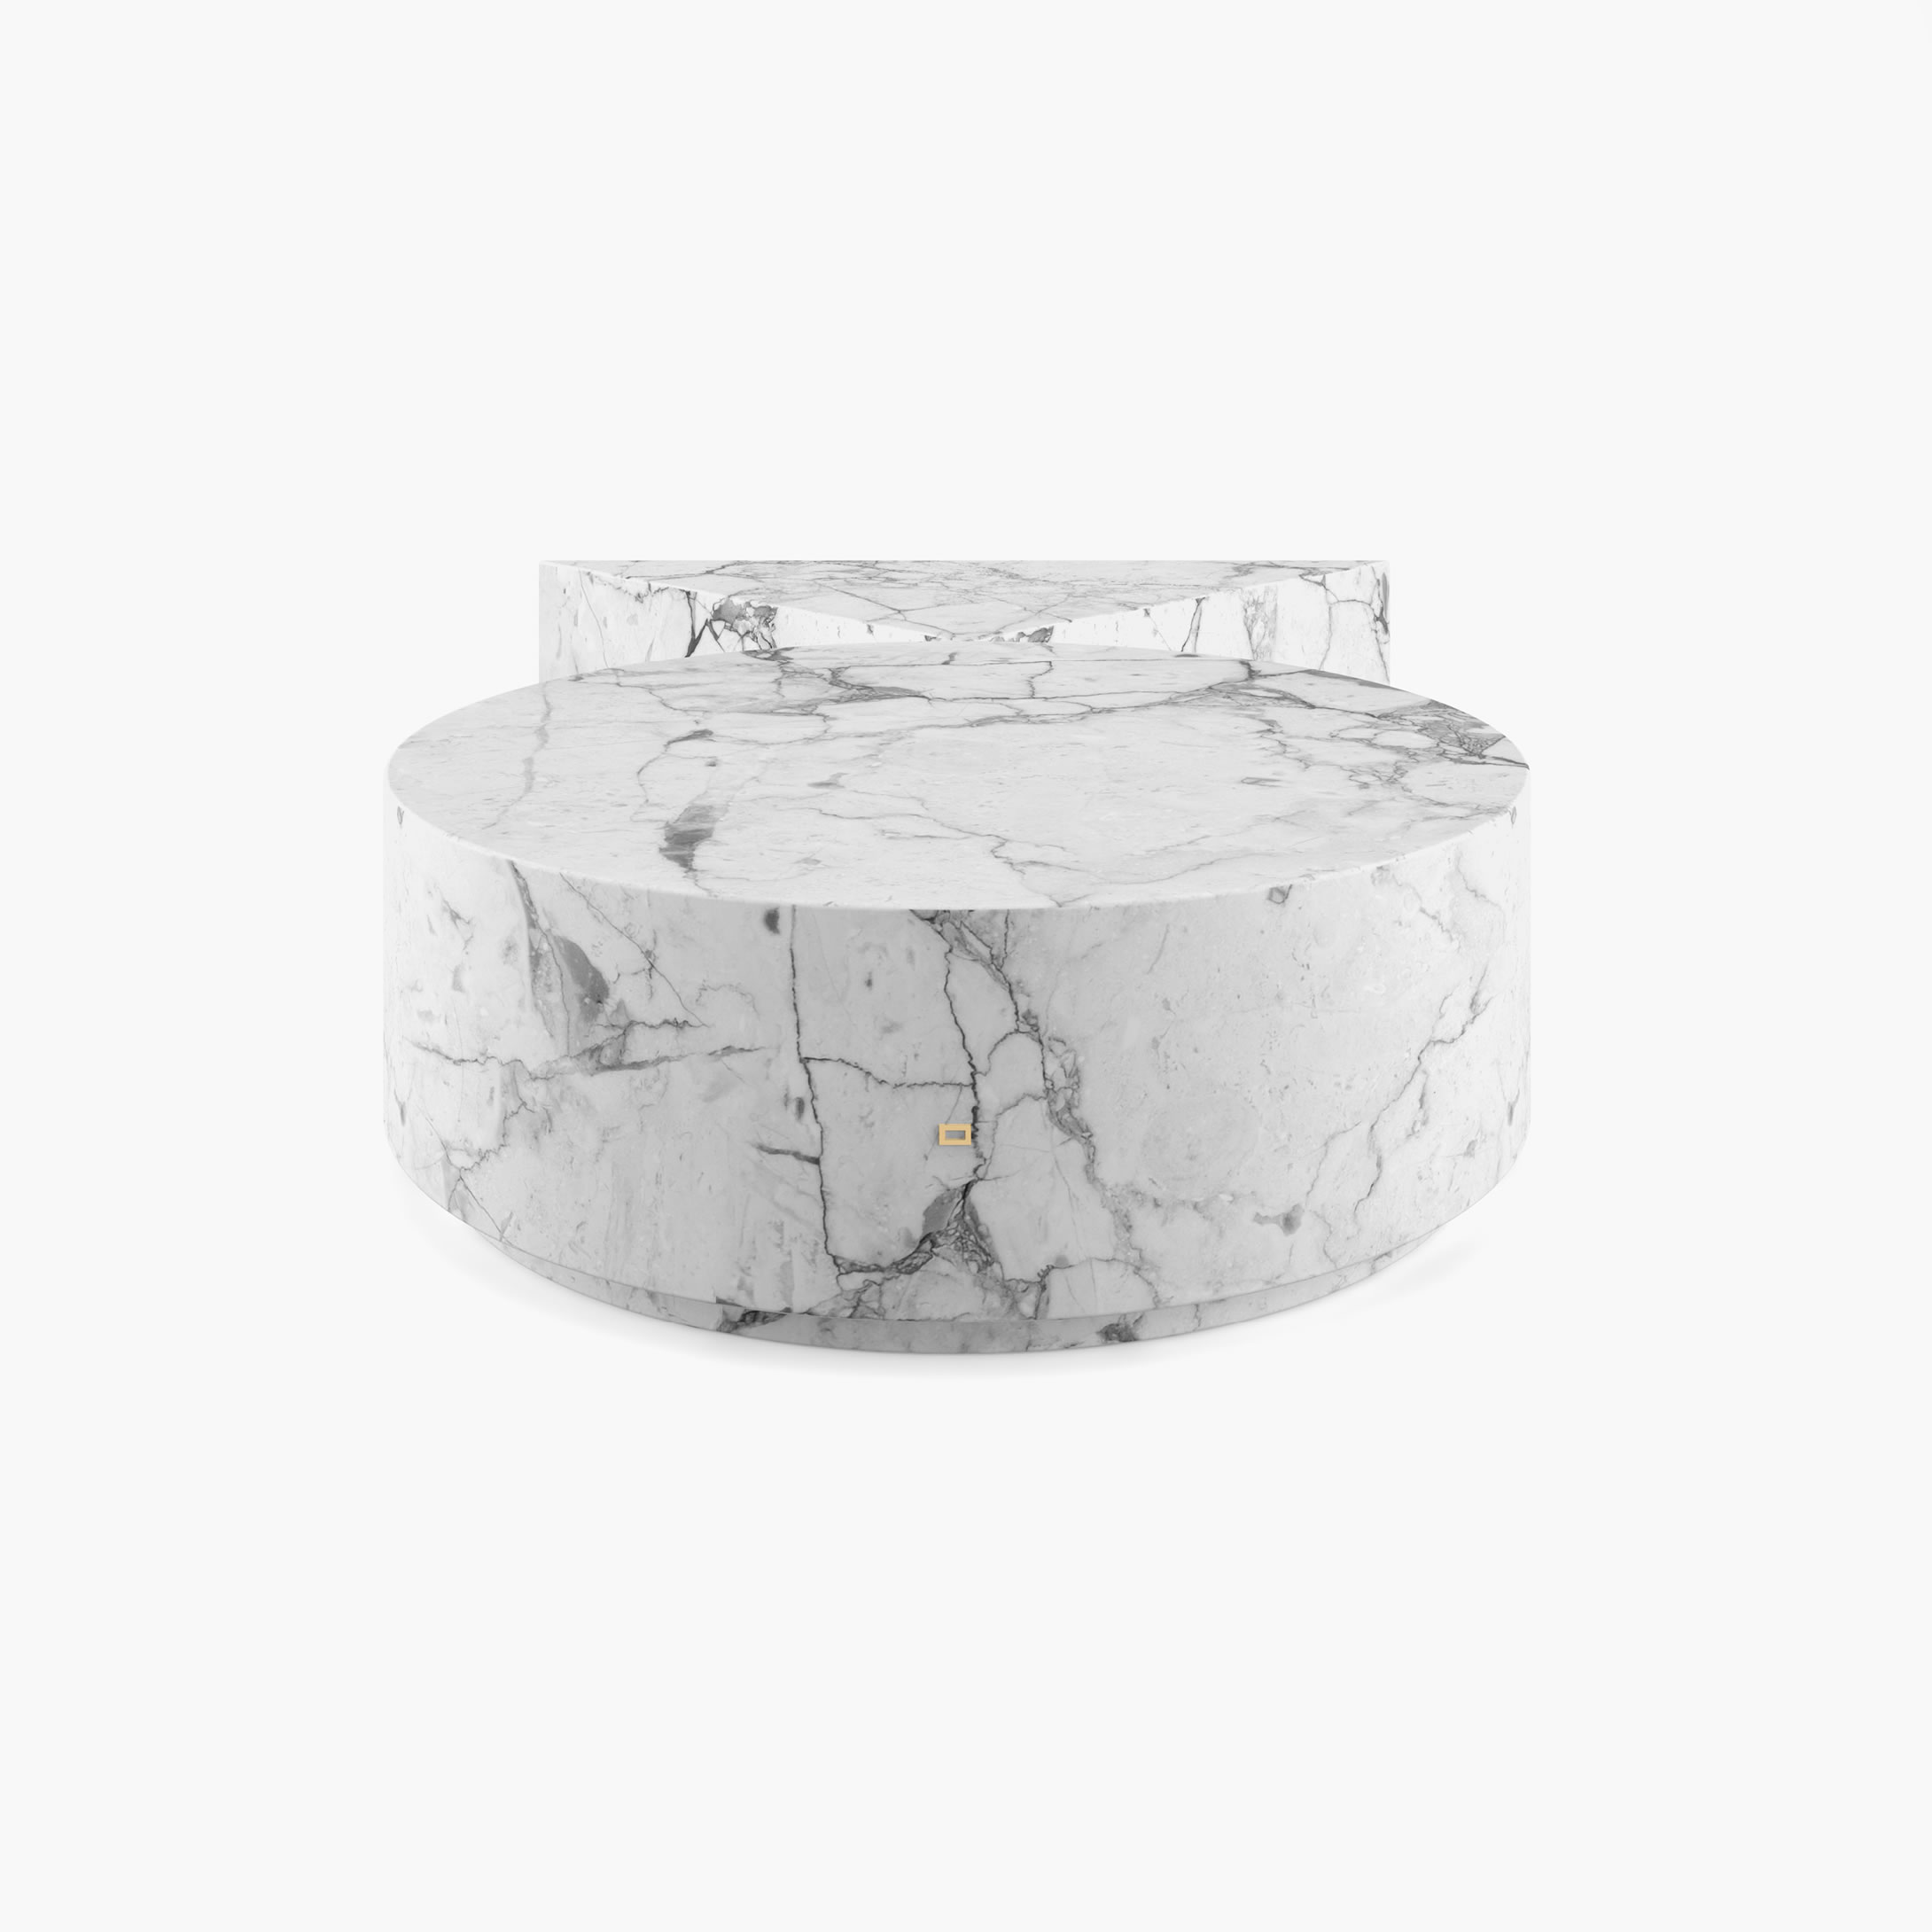 Center Table round Prism Cylinder White Arabescato Marble artistic Living Room art works Center  Coffee Tables FS 72 73 FELIX SCHWAKE